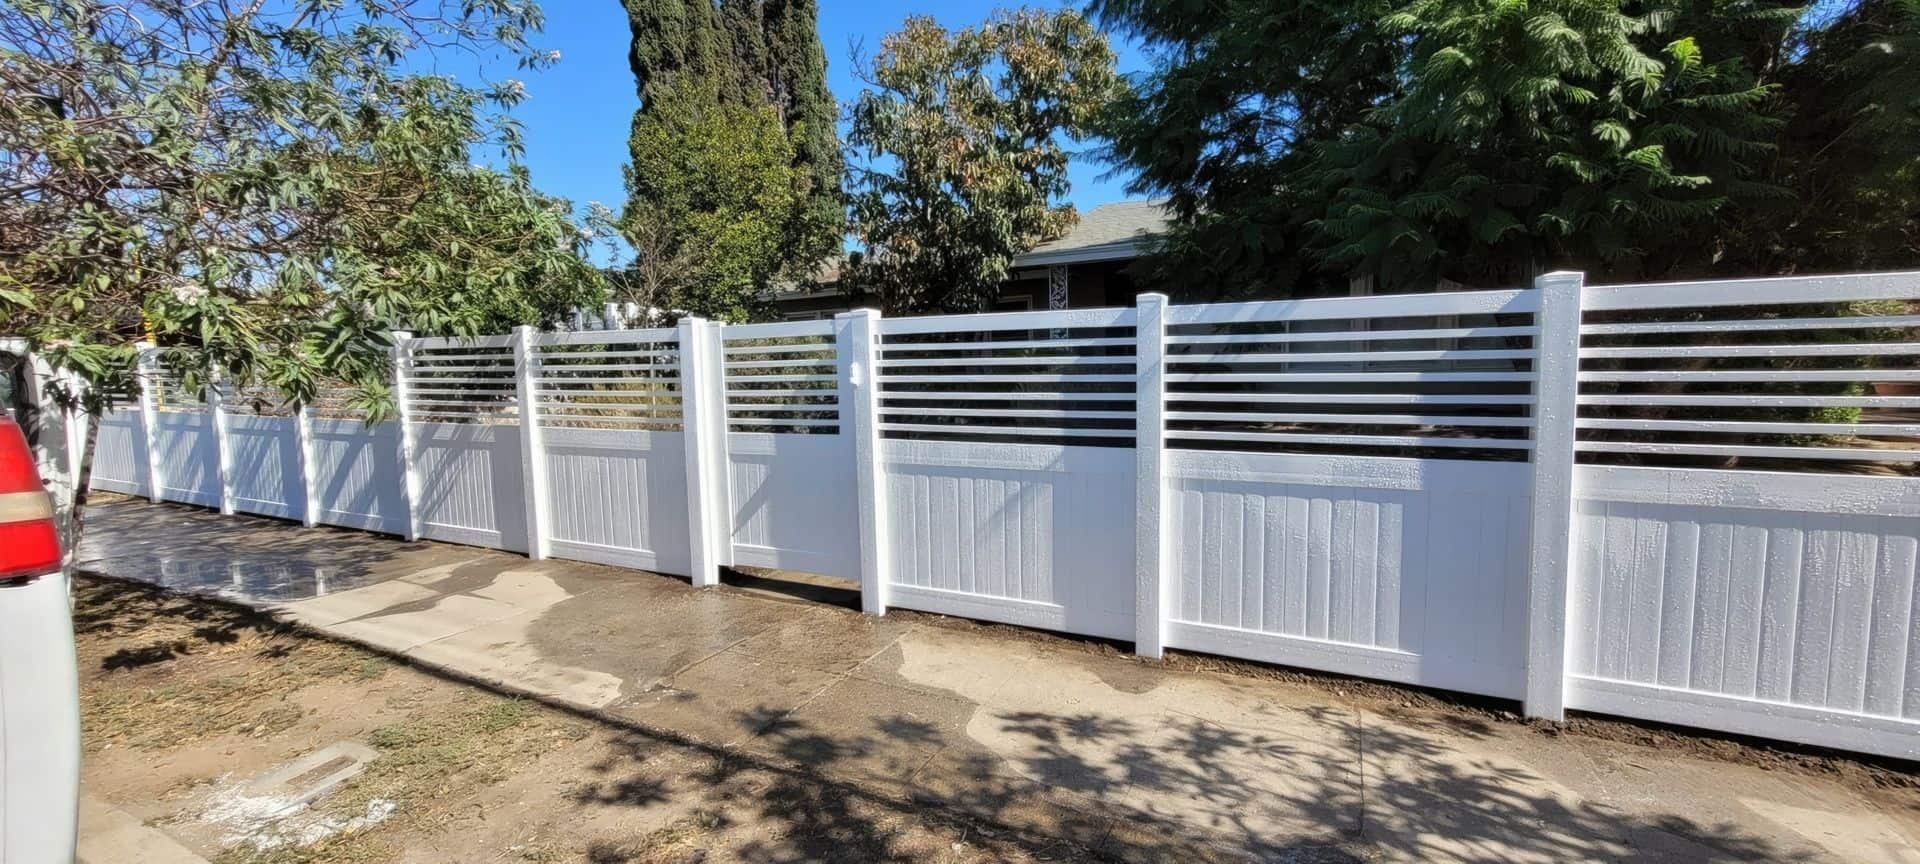 Vinyl privacy and picket fence with horizontal slats and gate leading into front lawn with a multitude of trees and a grassy lawn.